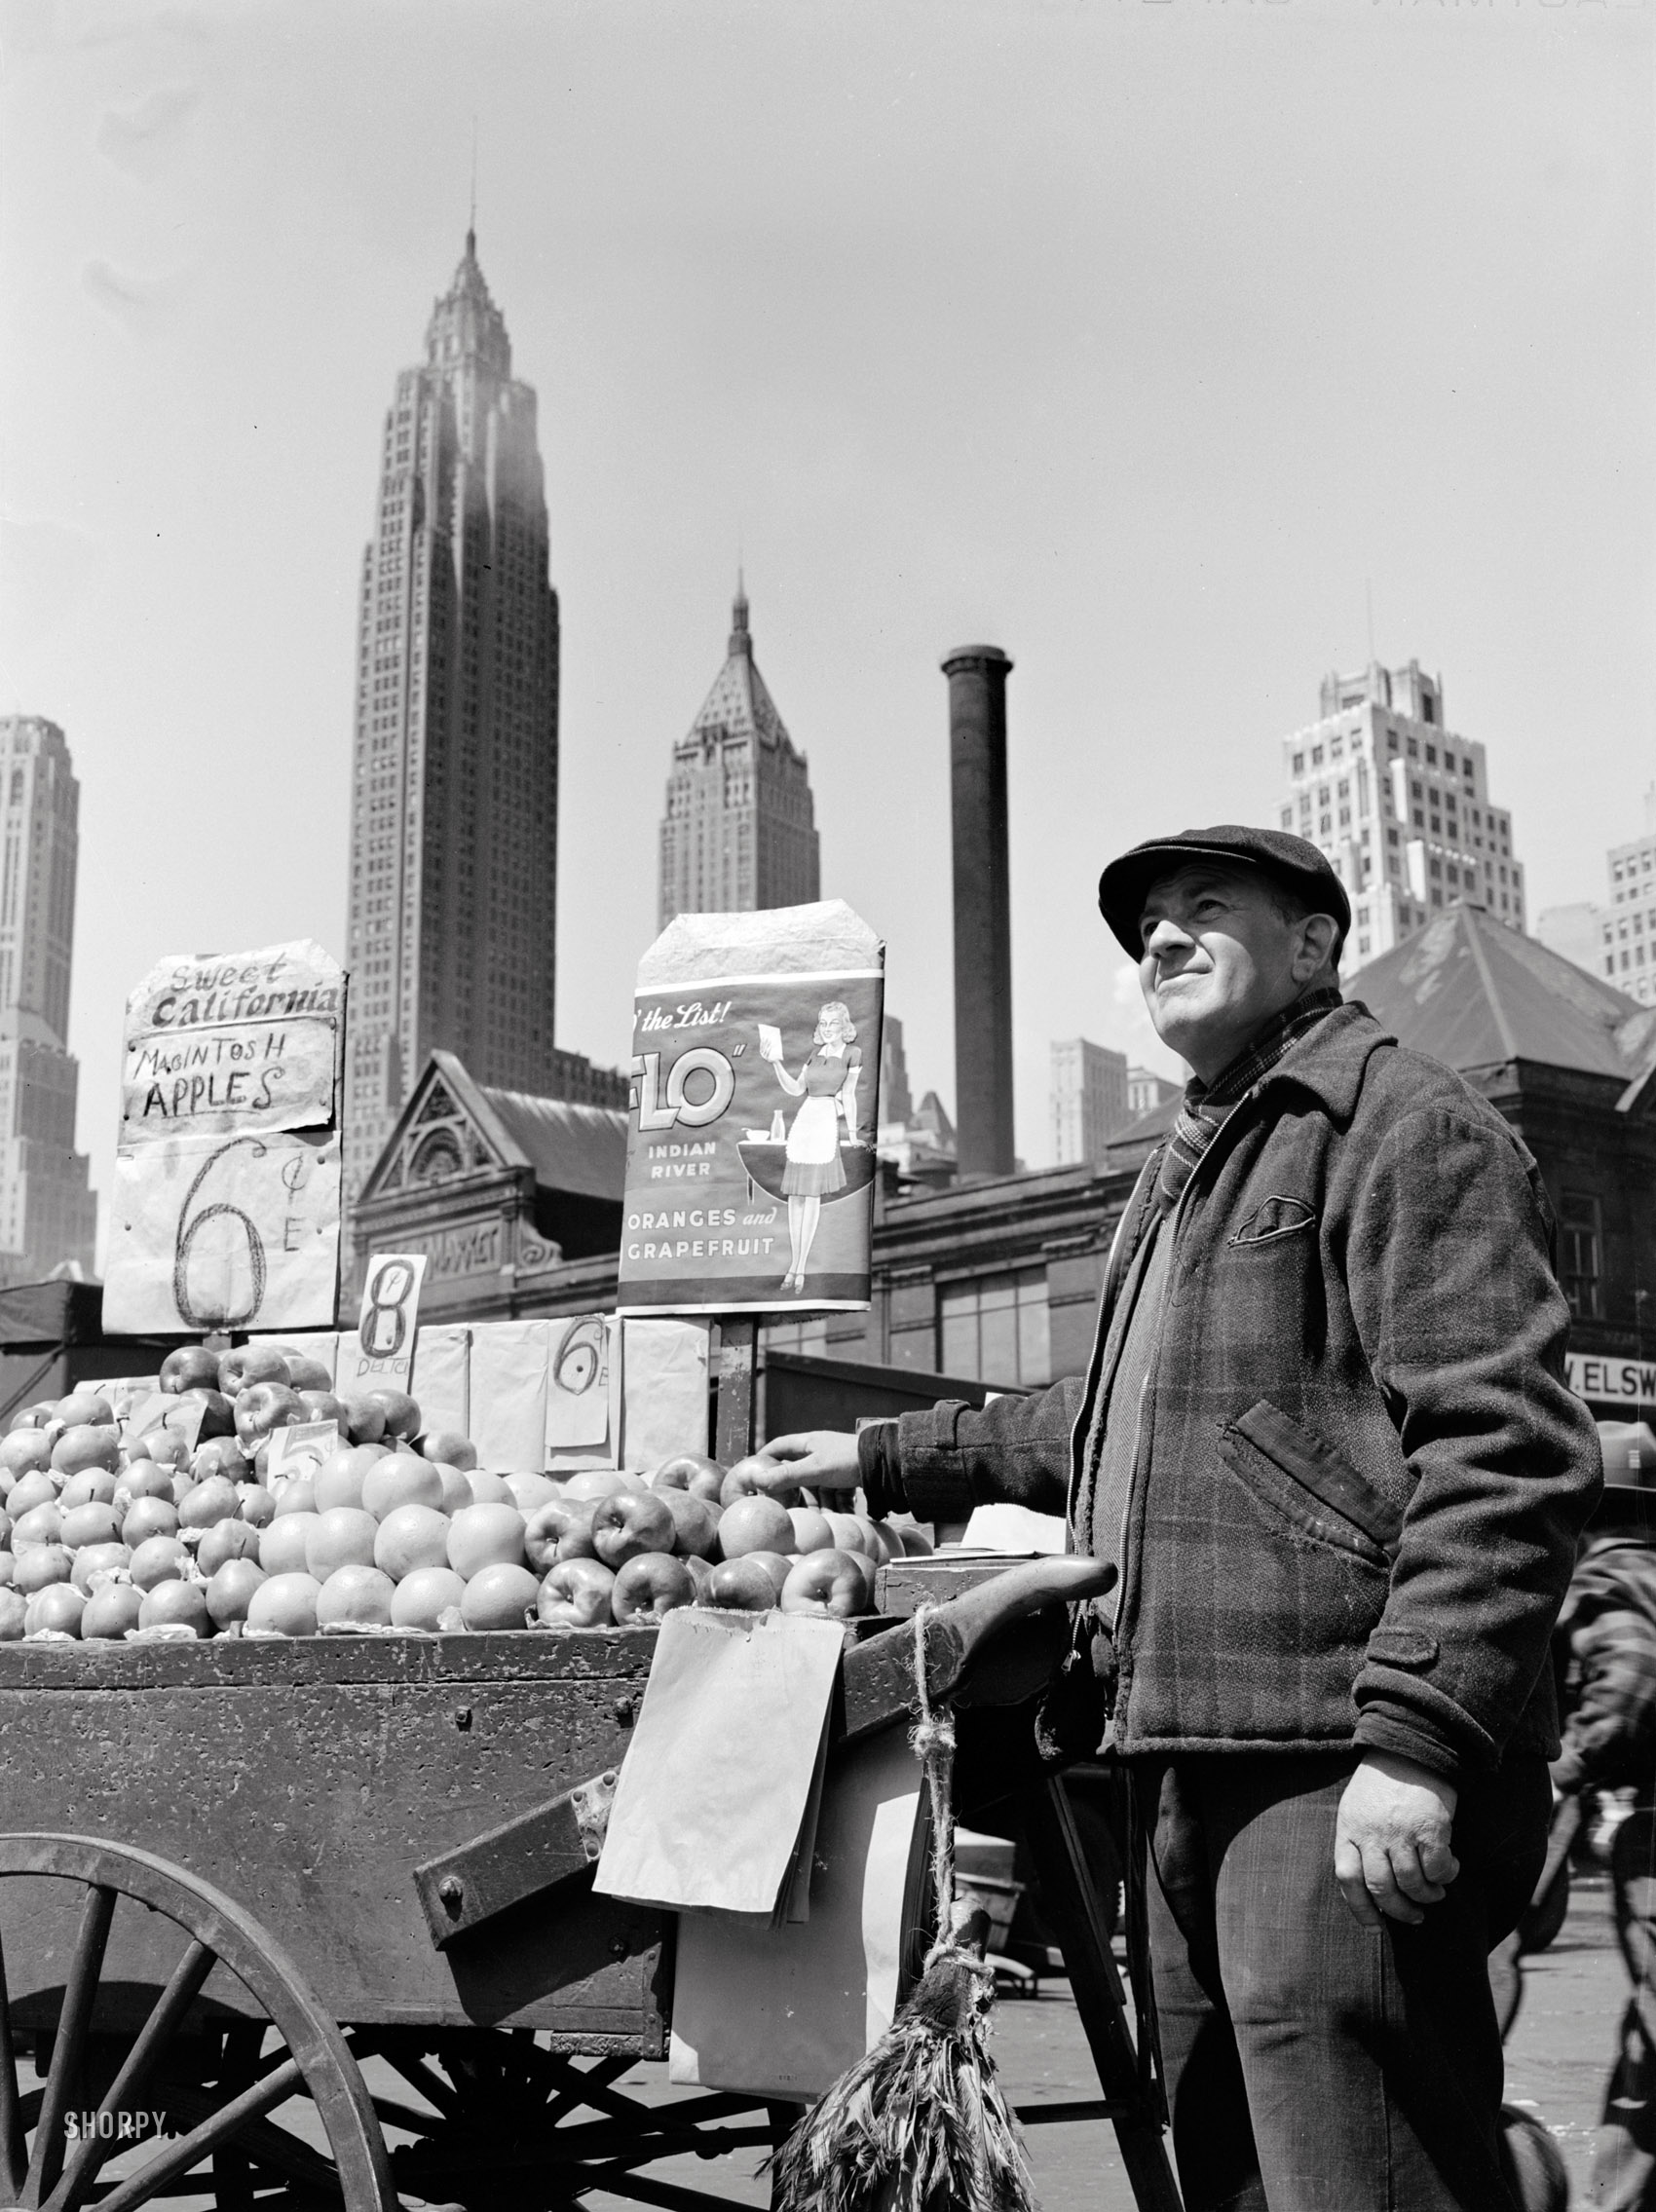 New York, May 1943. "Pushcart fruit vendor at the Fulton Fish Market." Photo by Gordon Parks for the Office of War Information. View full size.